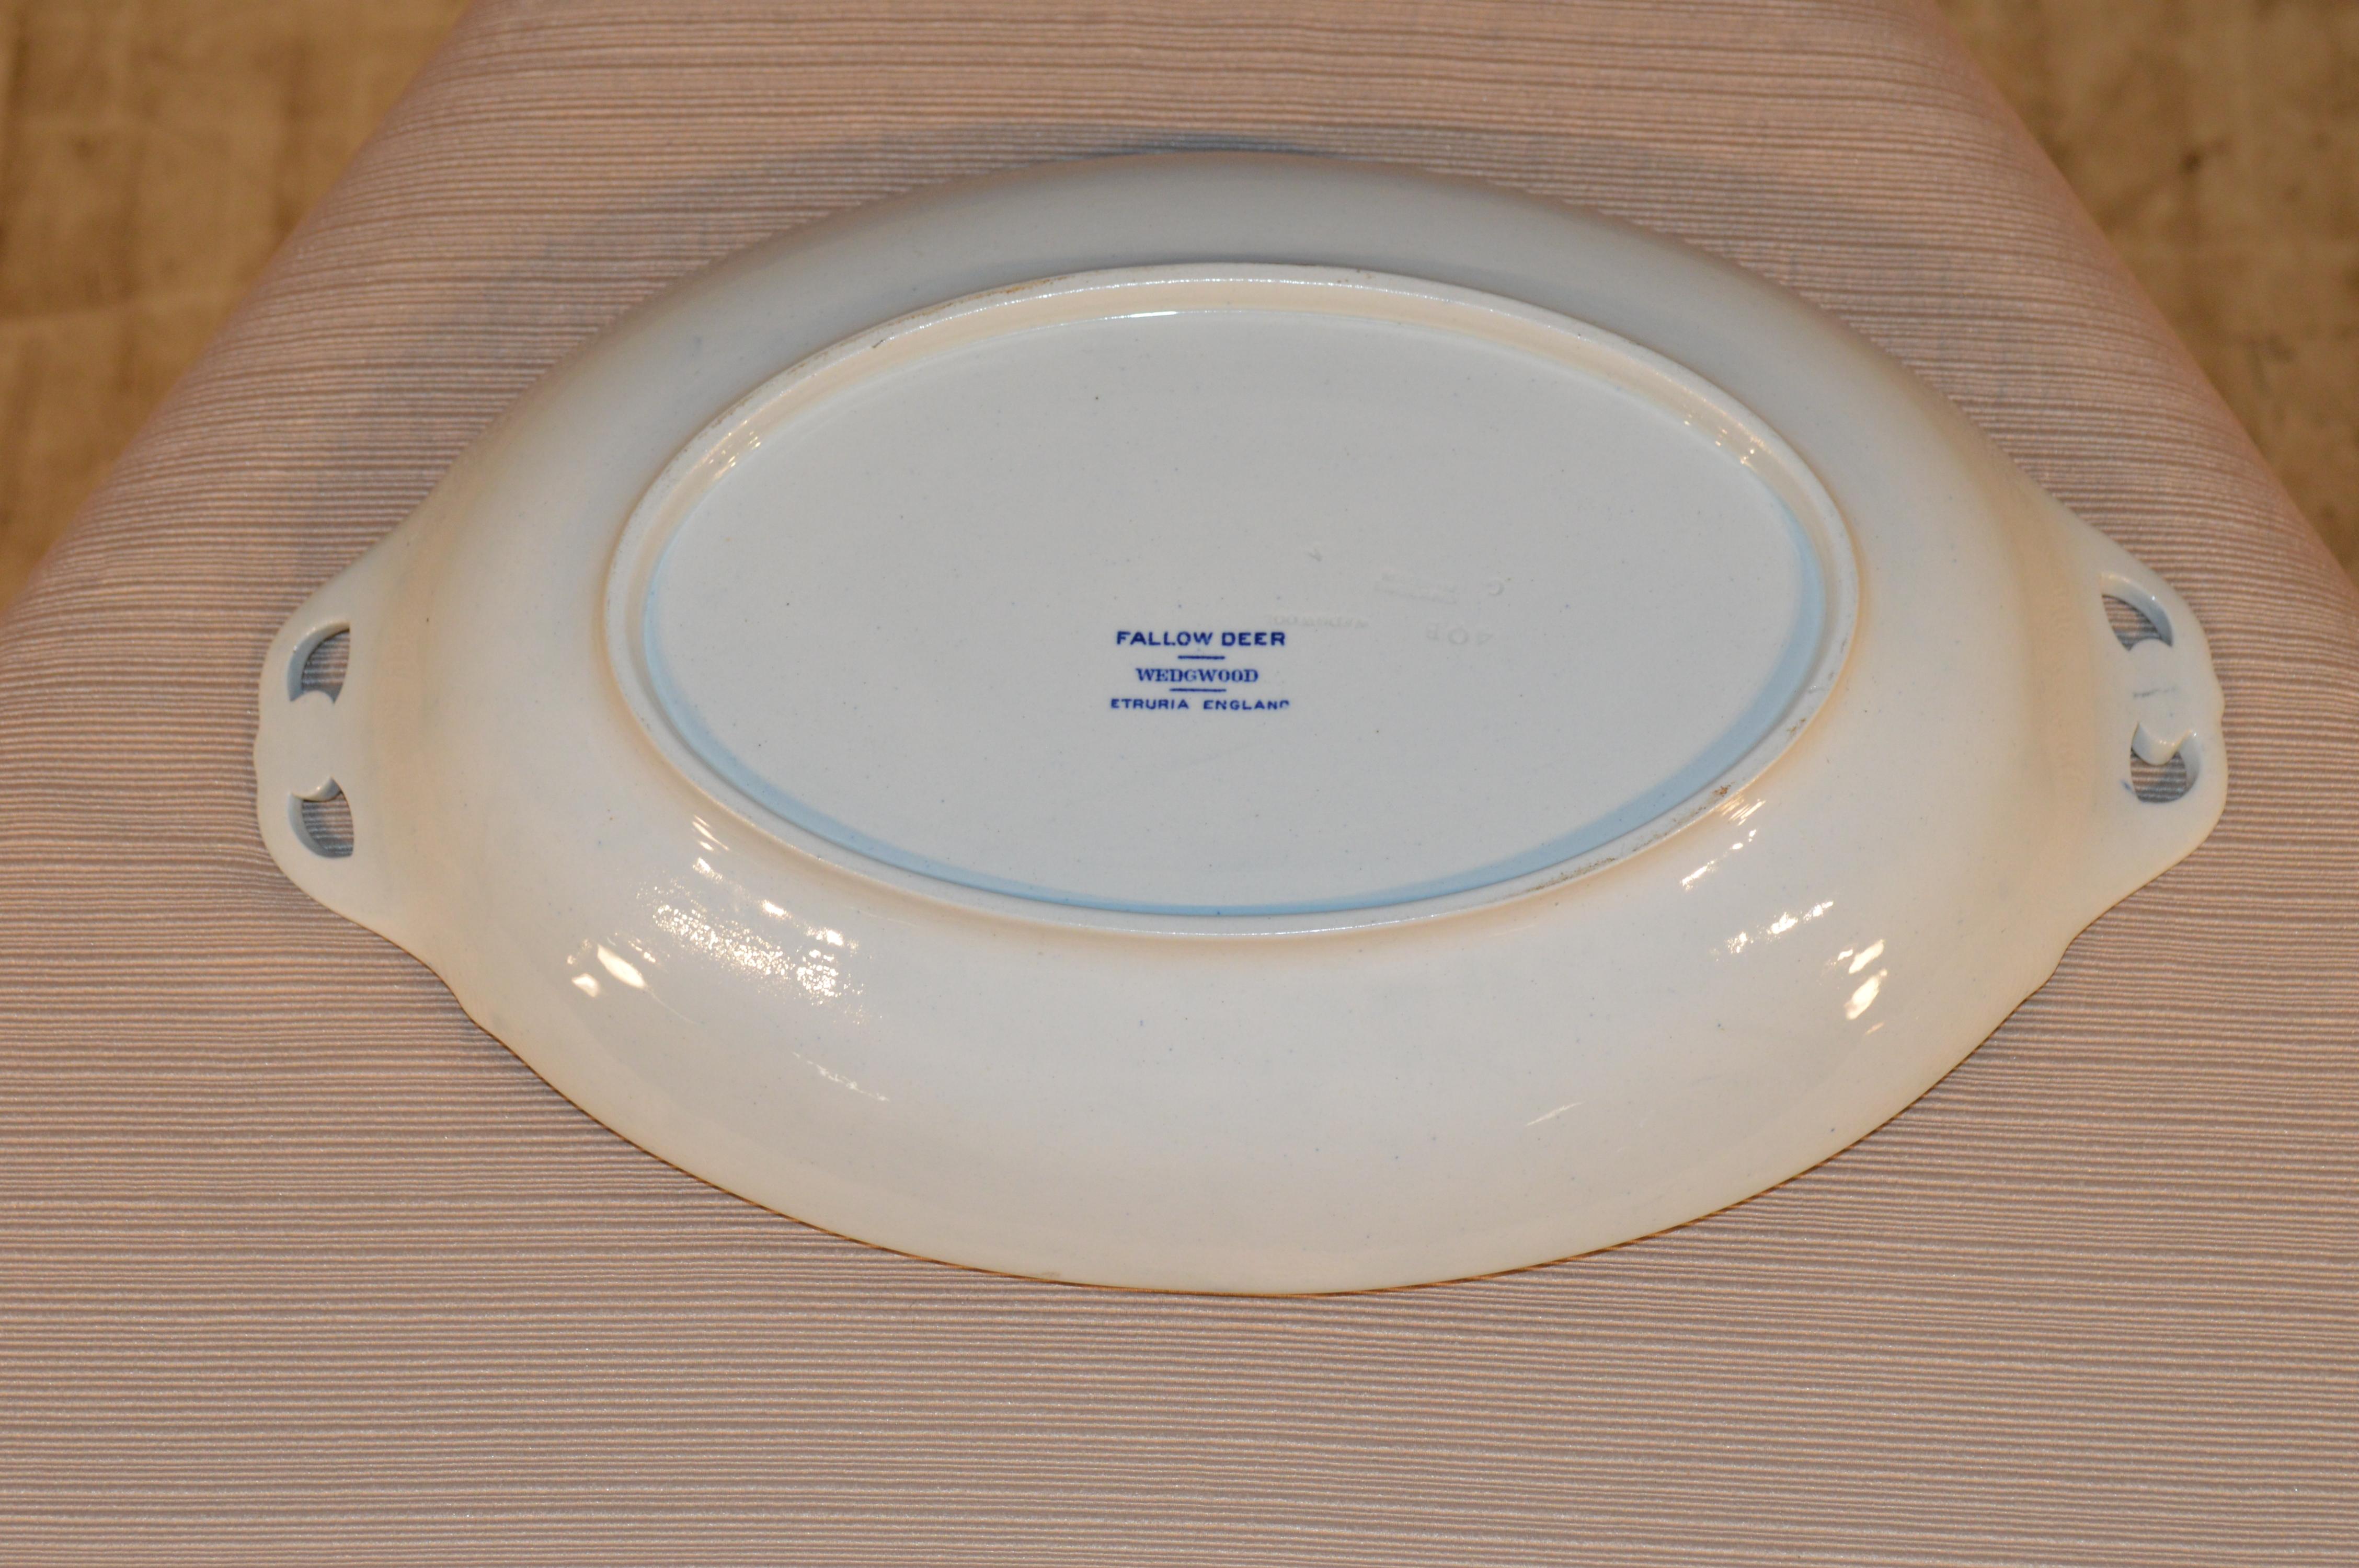 Signed Wedgwood serving bowl in the 